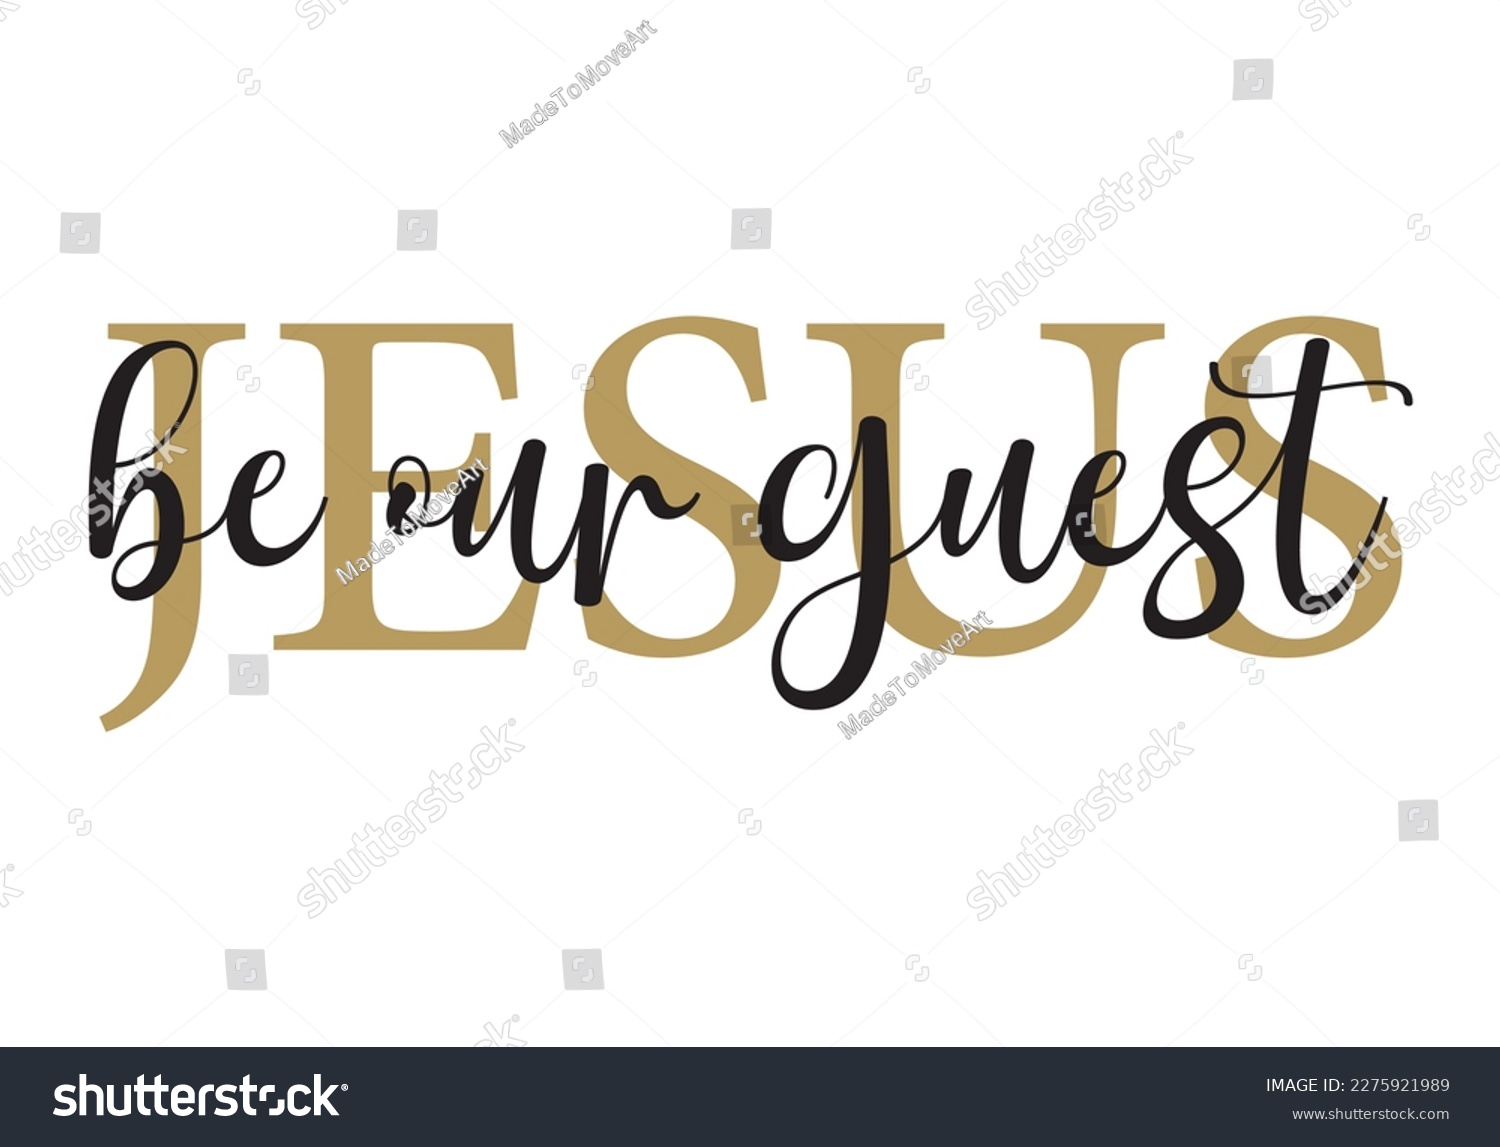 SVG of Jesus Be Our Guest, Christian Wall Art, Room Wall Decor, Christian Quote, Christian Home Decor, Printable Wall Art, vector illustration svg